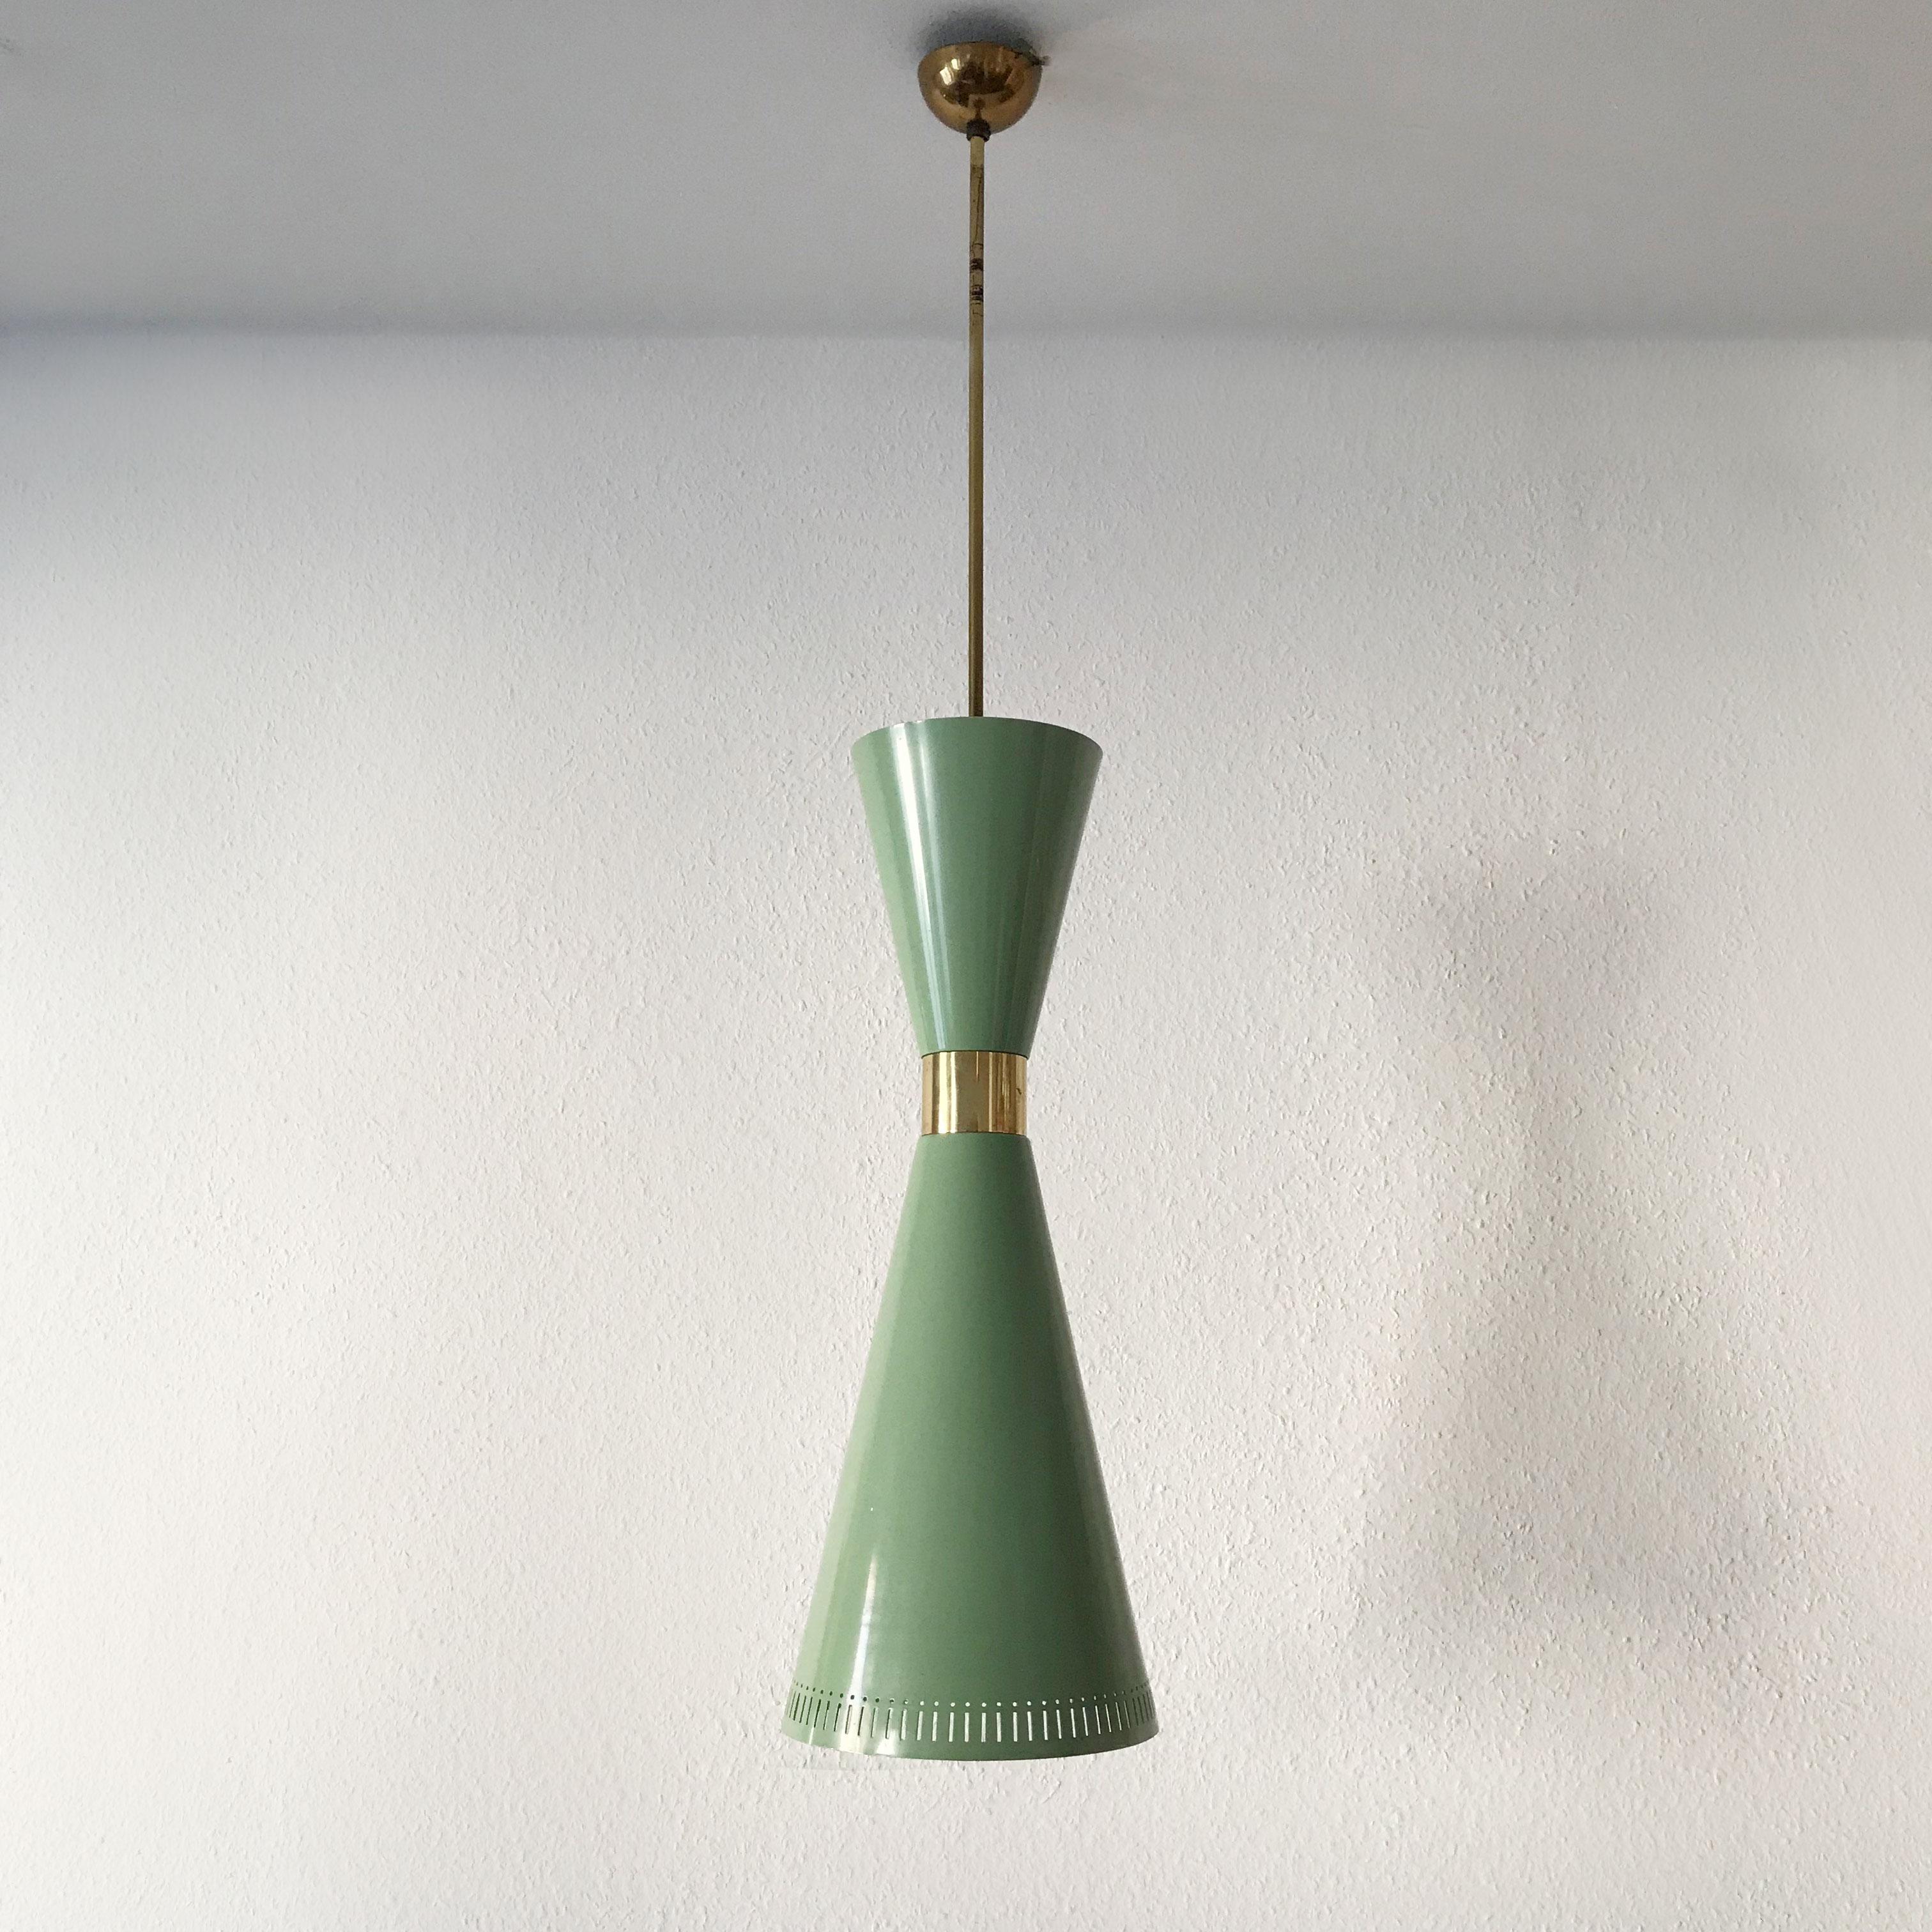 Swiss Exceptional Mid-Century Modern Large Diabolo Pendant Lamp by BAG Turgi, 1950s